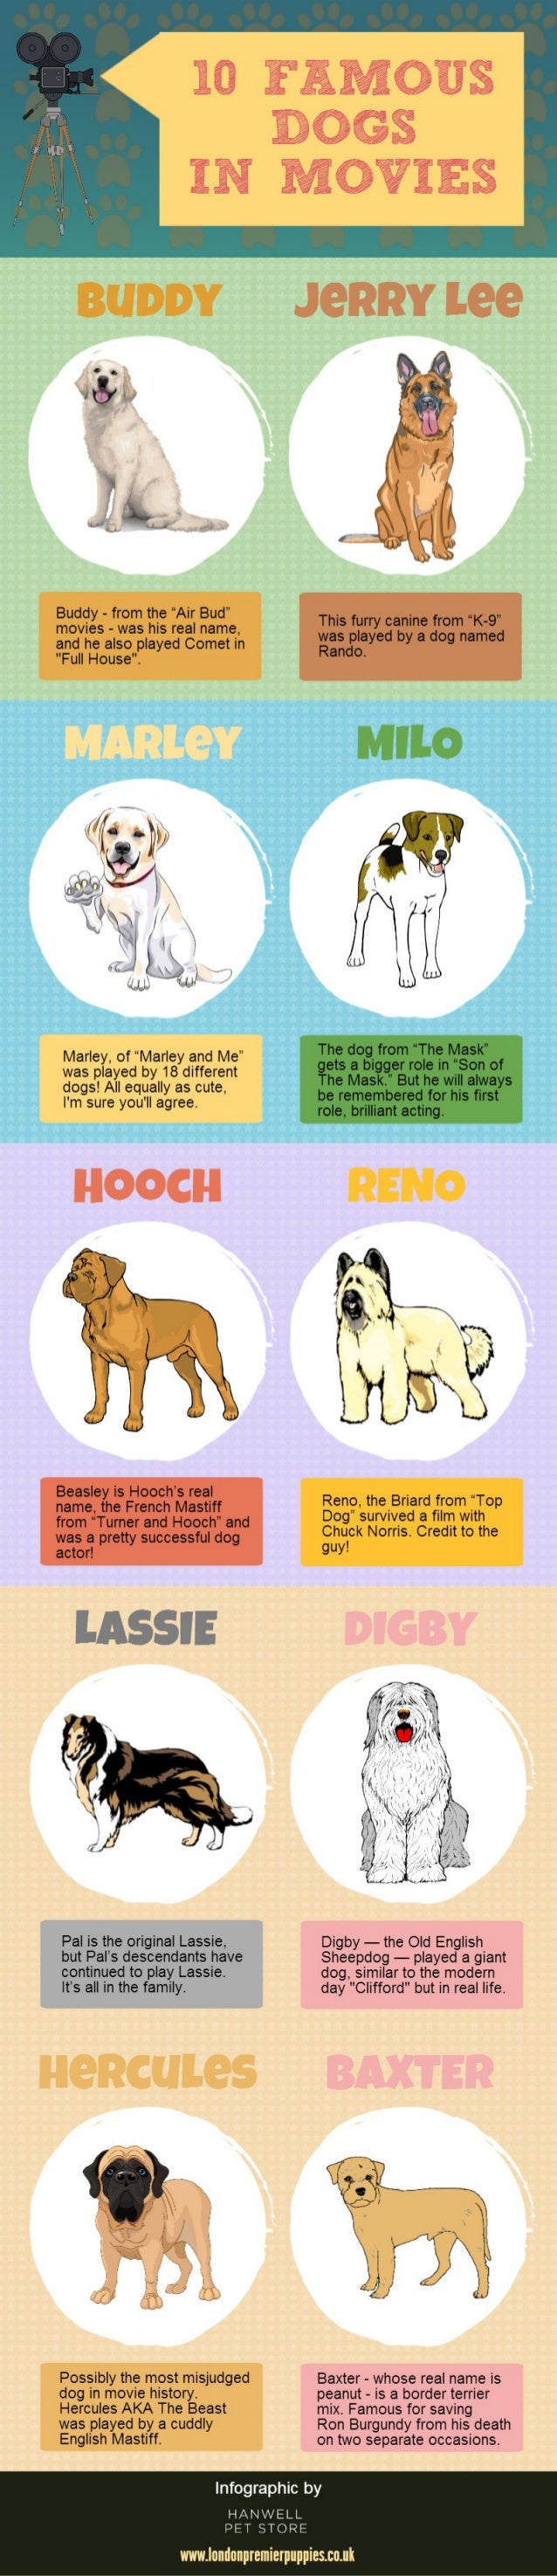 10 Famous Dogs in Movies